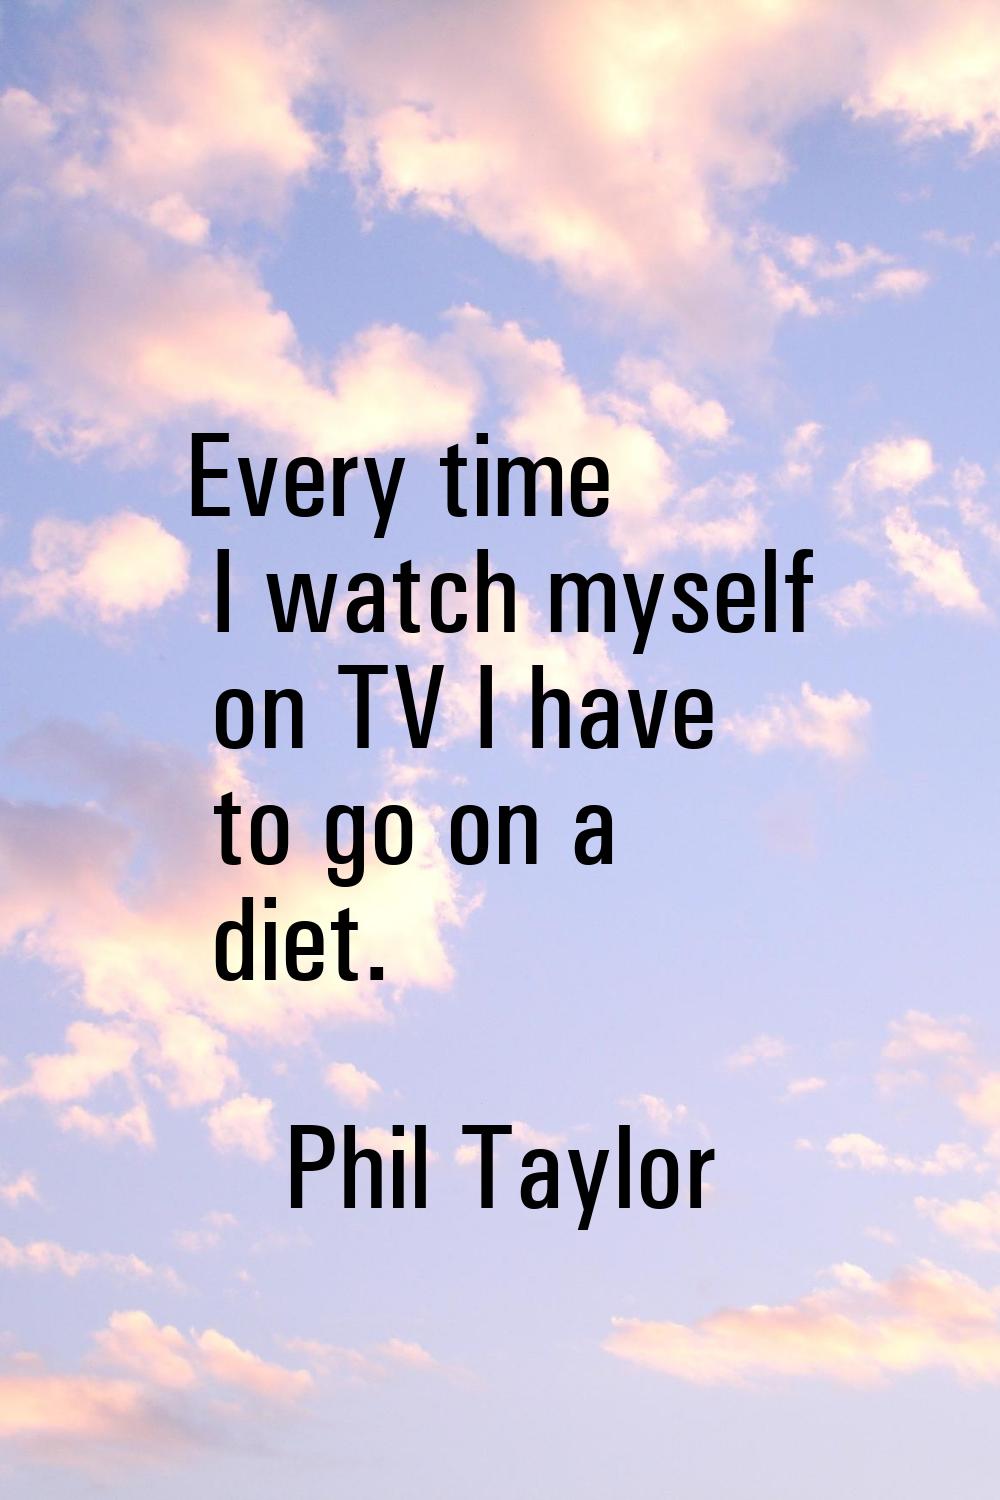 Every time I watch myself on TV I have to go on a diet.